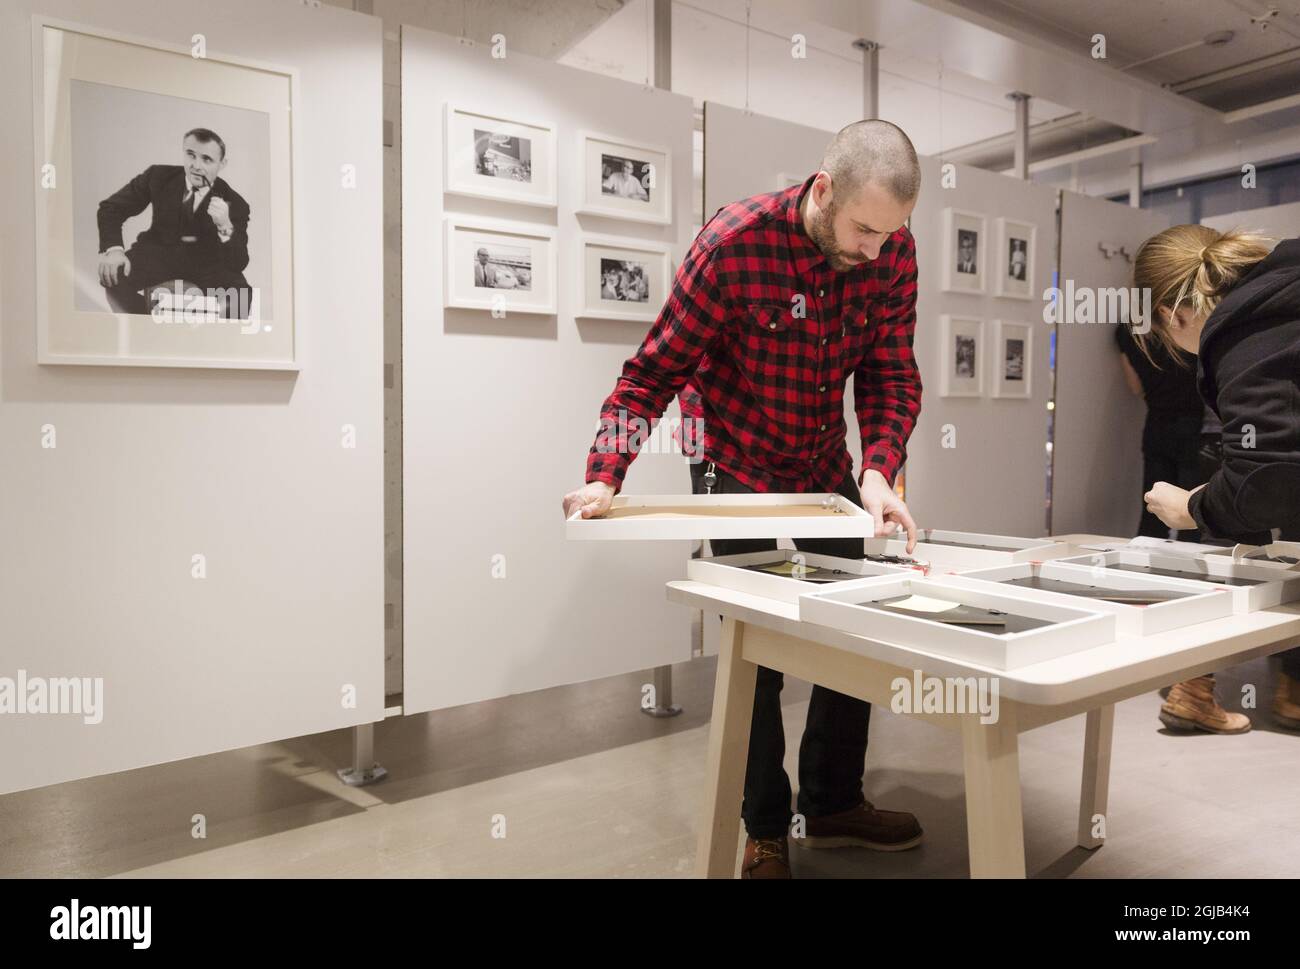 Employees hang pictures of Ingvar Kamprad, founder of Swedish multinational furniture retailer IKEA, in the entrance of the IKEA museum in Almhult, Sweden, on Jan. 28, 2018. Kamprad has died at an age of 91. The first ever IKEA store was opened in Almhult, and Kamprad grew up in the area. Photo: Ola Torkelsson / TT / code 75777  Stock Photo